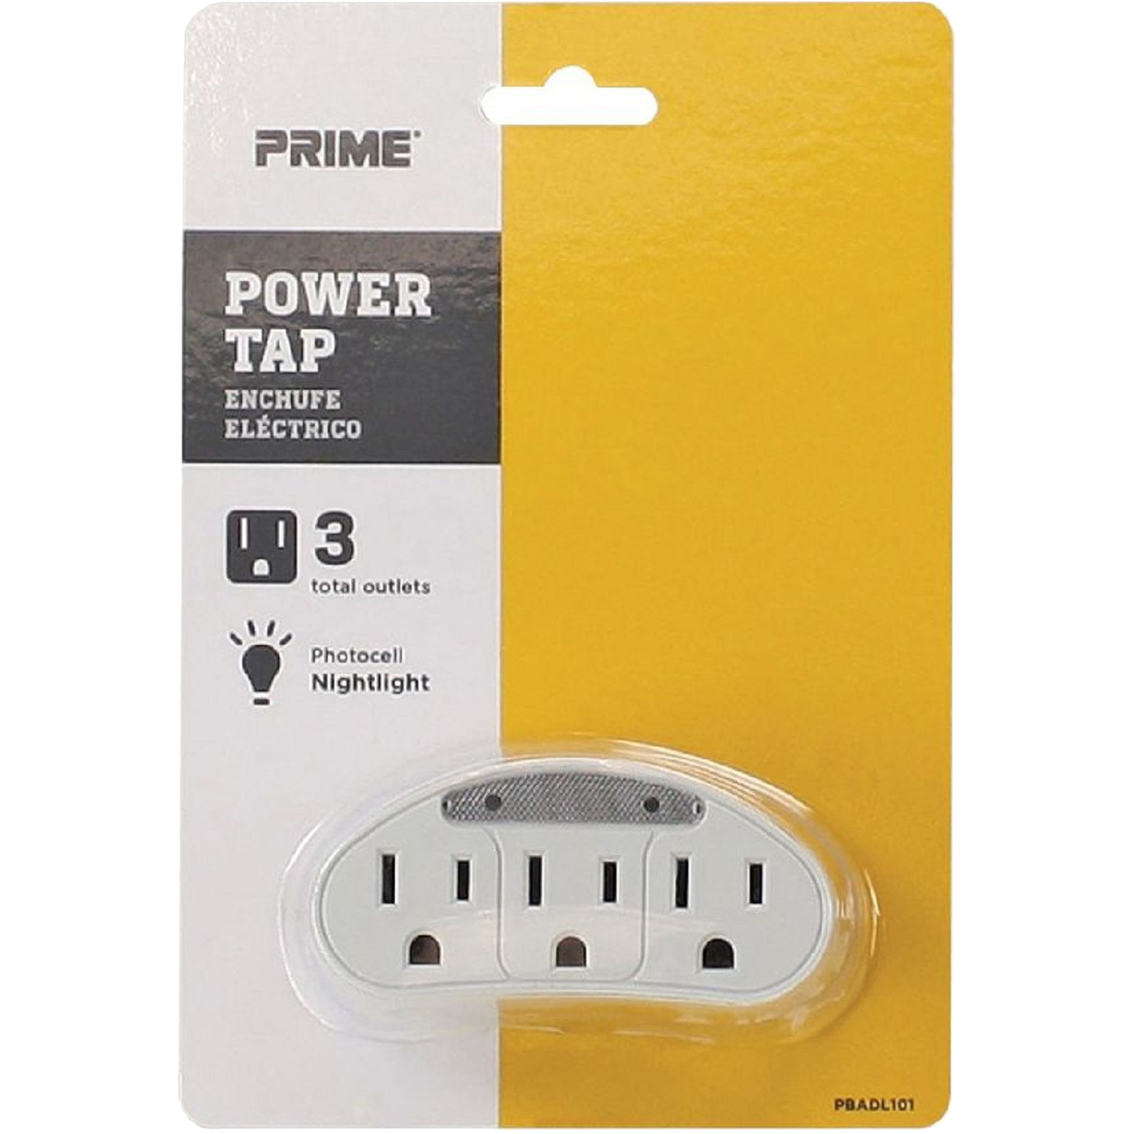 Prime Cable 3 Outlet Power Tap With Photocell Nightlight | Garage | Patio, Garden & Garage | Shop The Exchange